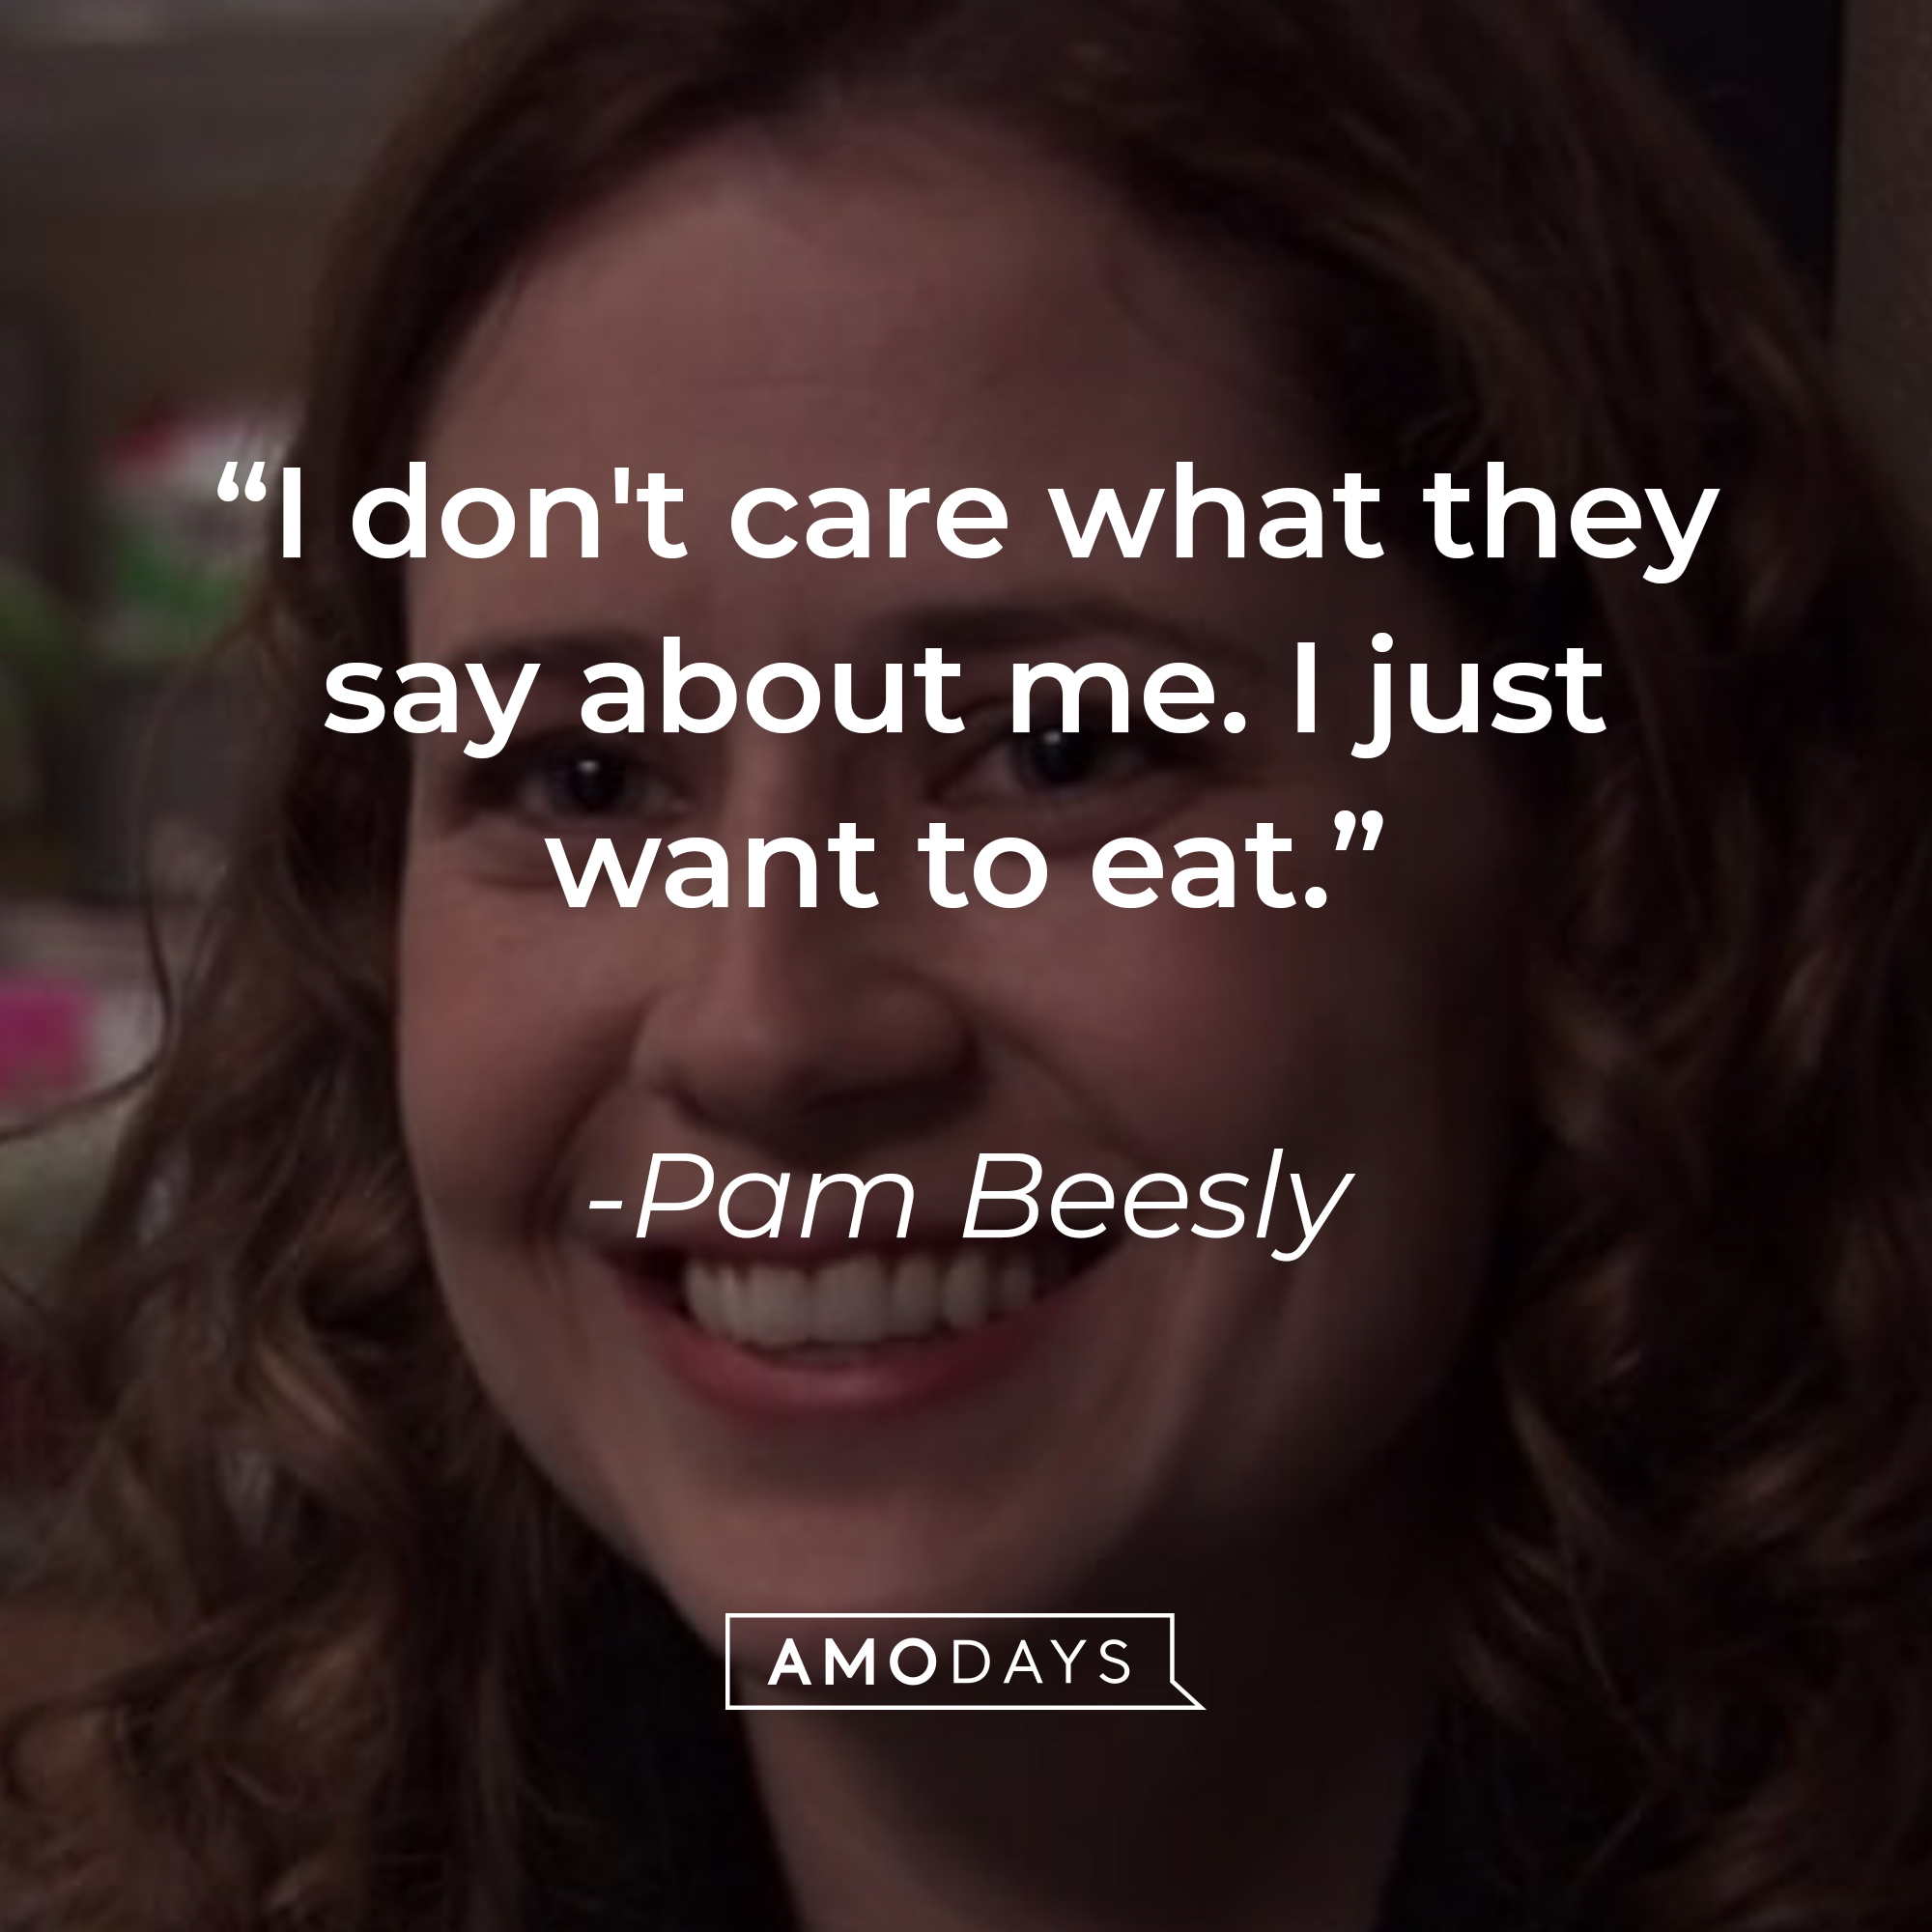 Pam Beesly's quote, "I don't care what they say about me. I just want to eat." | Source: Facebook/TheOfficeTV